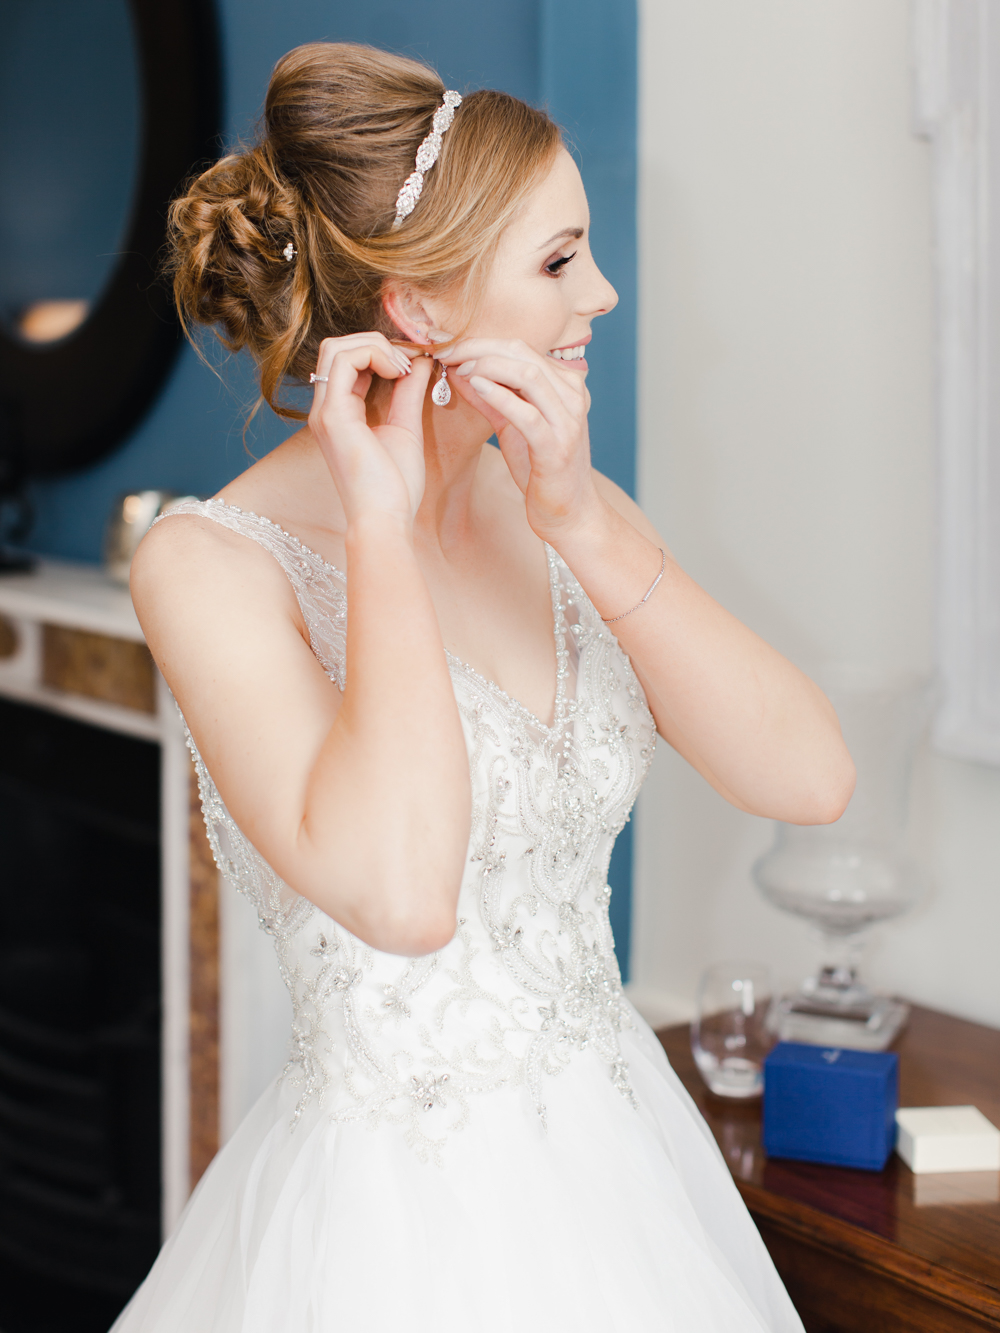 Bride getting ready putting on her earrings at Rockbeare Manor bridal suite